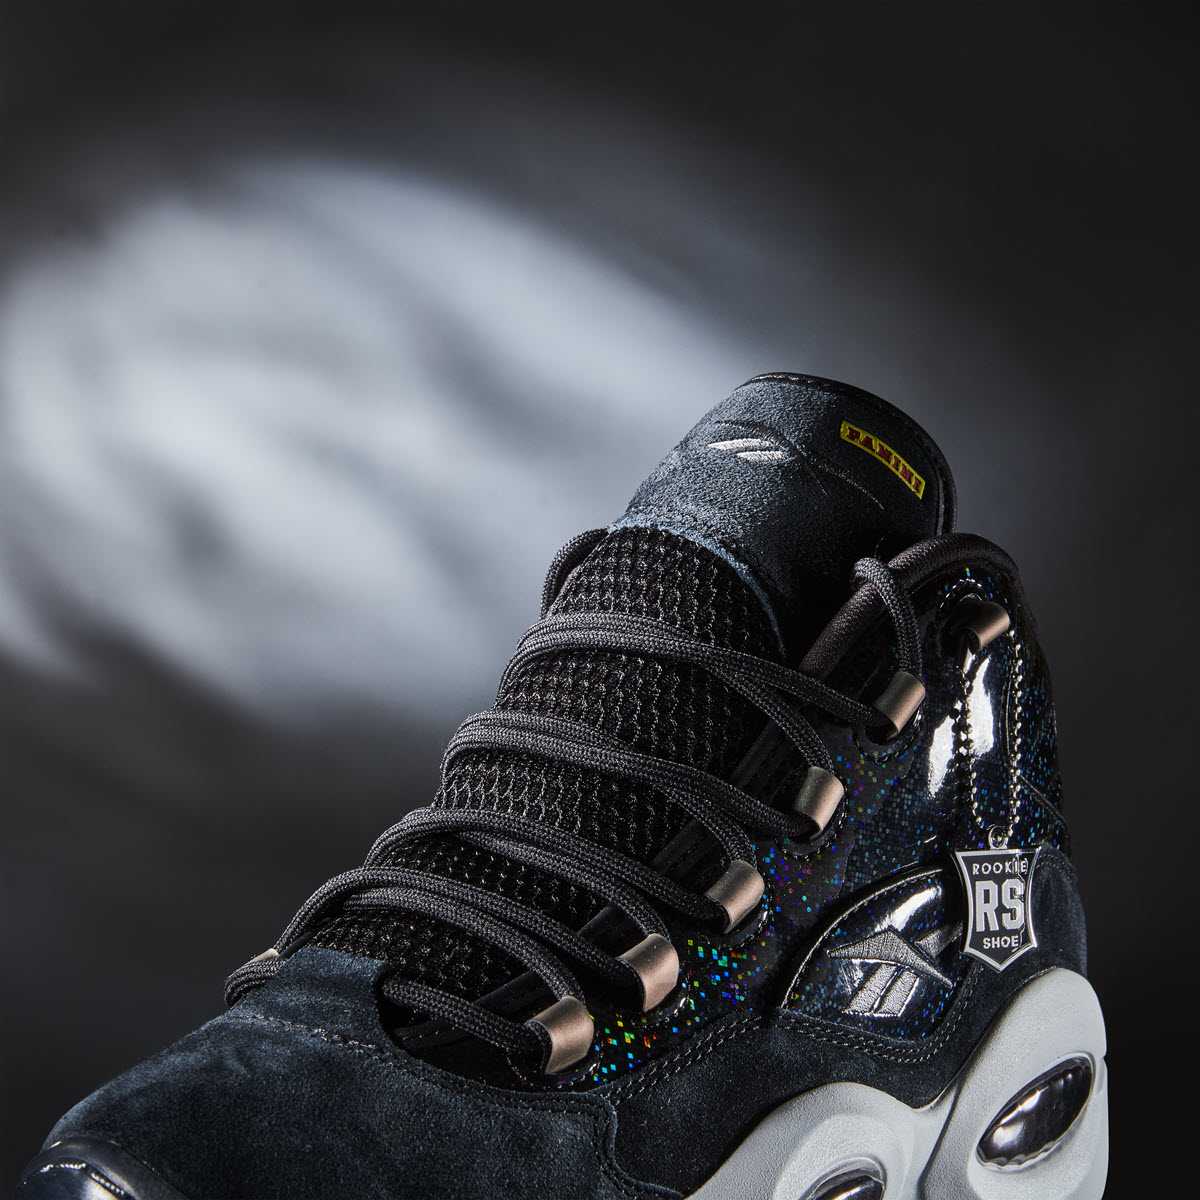 PANINI + REEBOK Question Shoe Collaboration OFFICIALLY DROPS